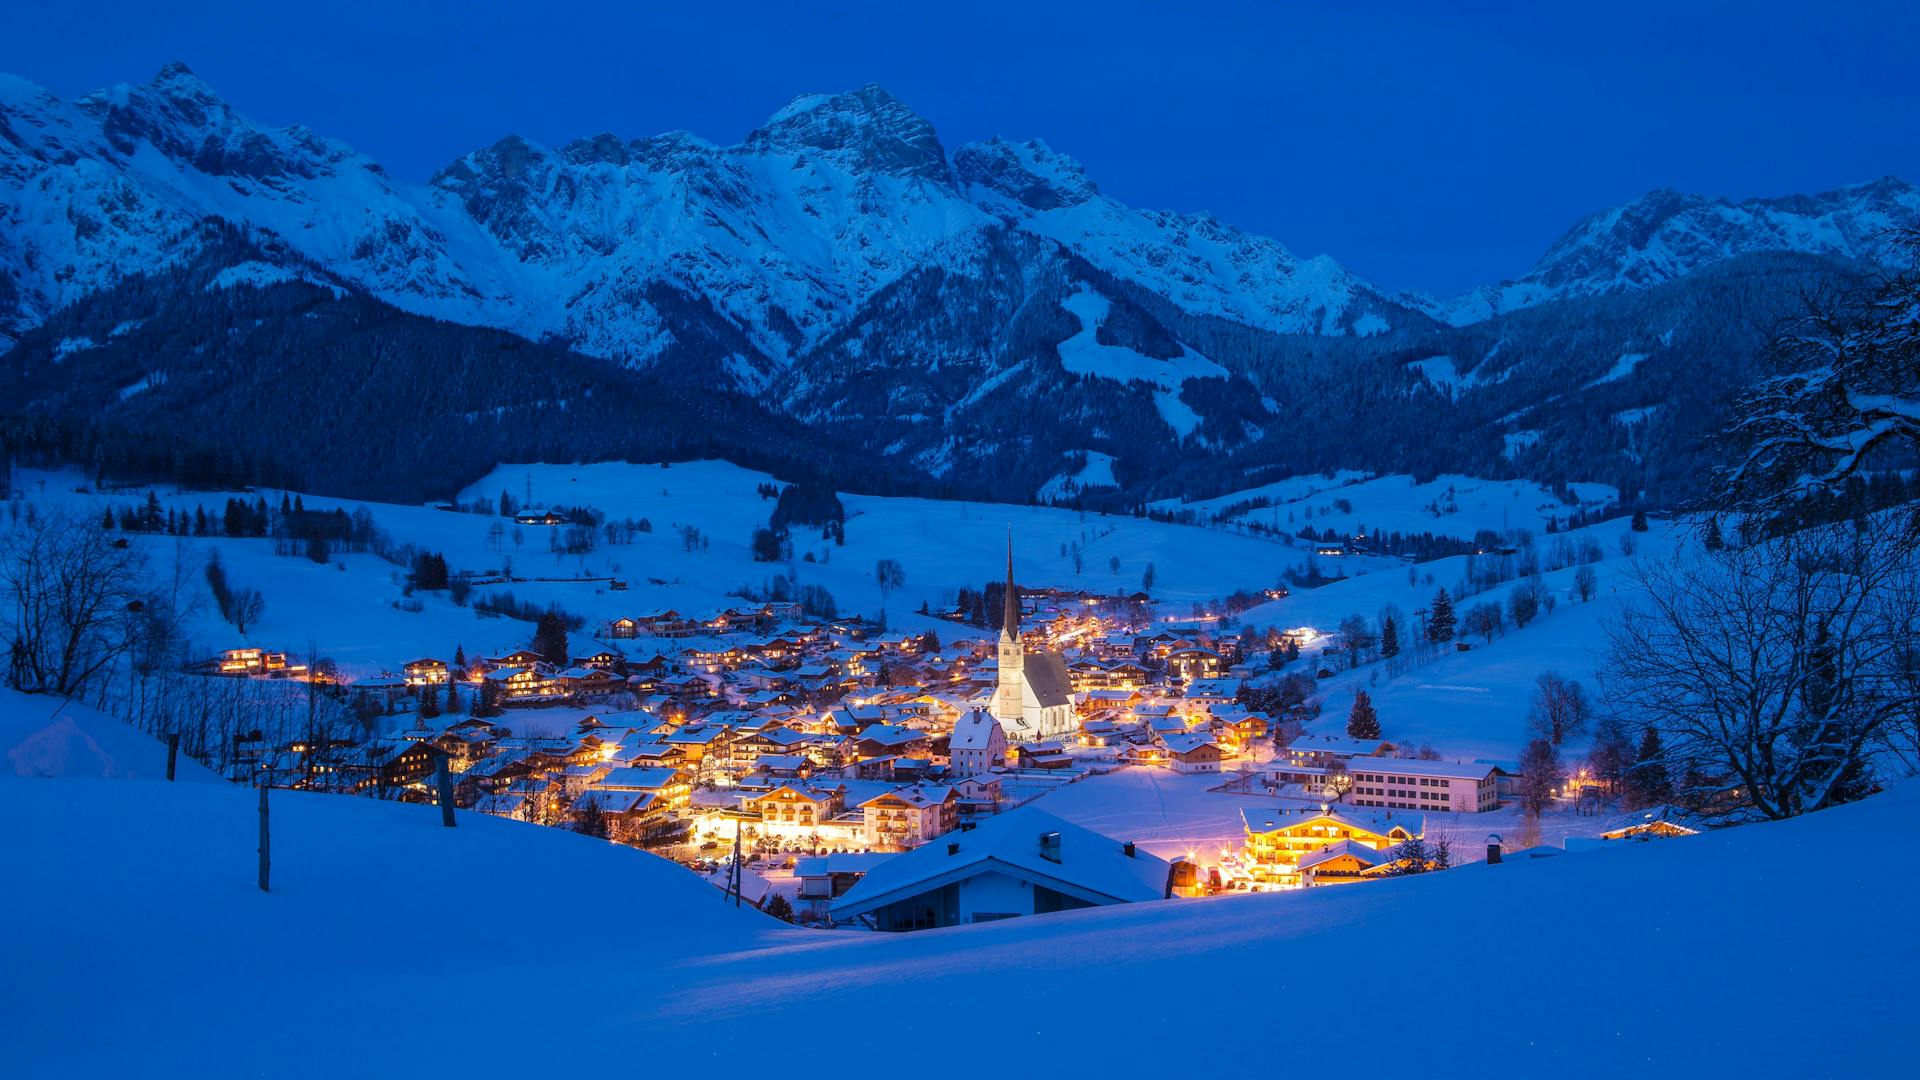 Maria Alm ski resort at night with town lit up and mountains in background